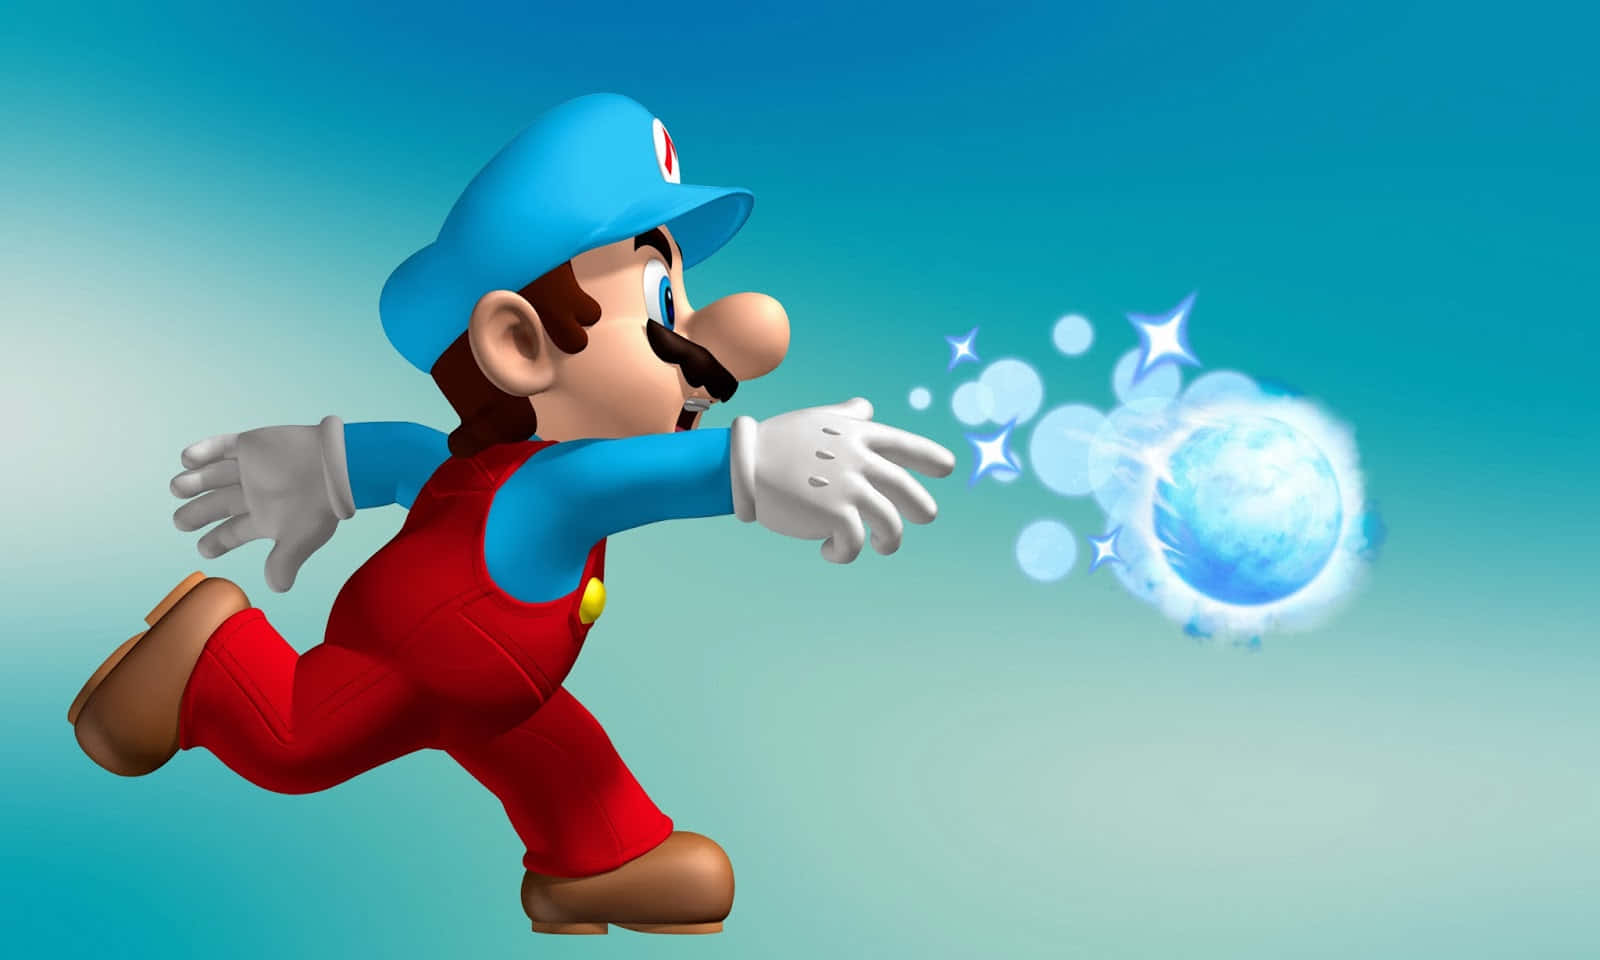 Experience a Modern Take on the Classic Mario Adventure